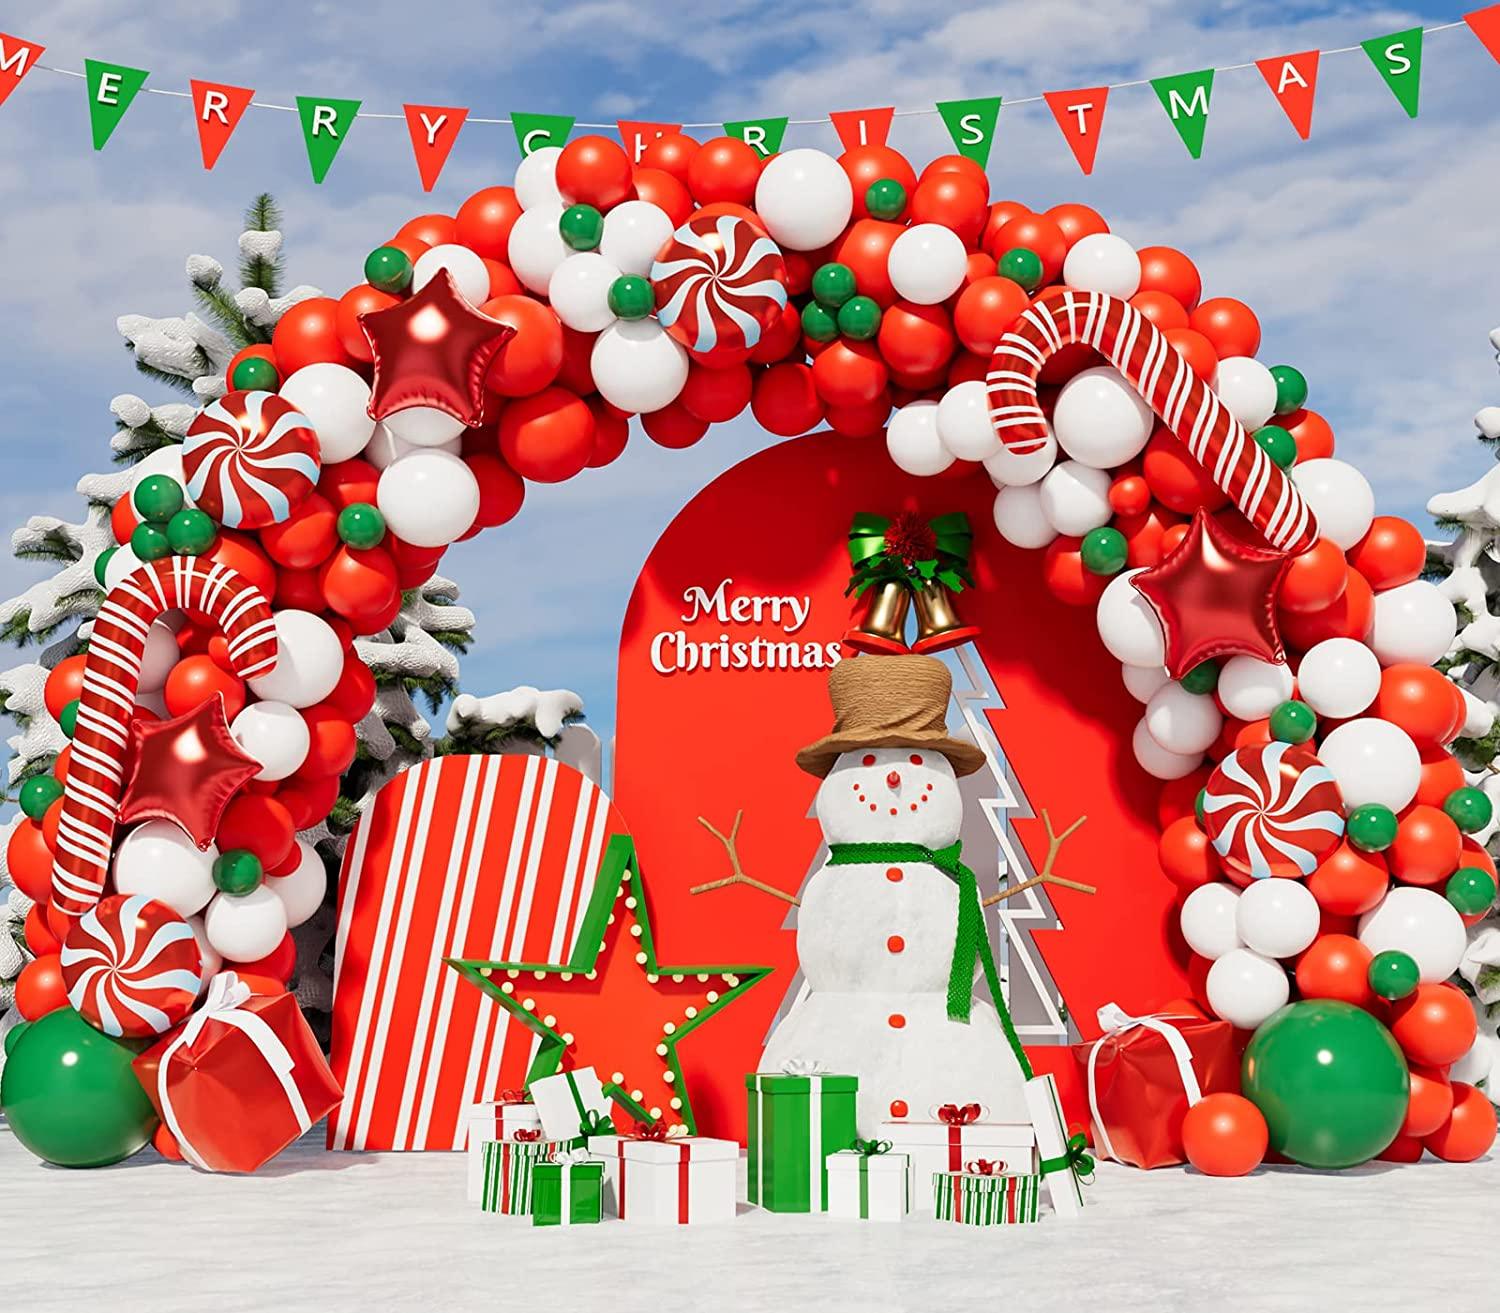 Christmas Balloon Garland Arch kit with Xmas Green Red White Candy Balloons - If you say i do